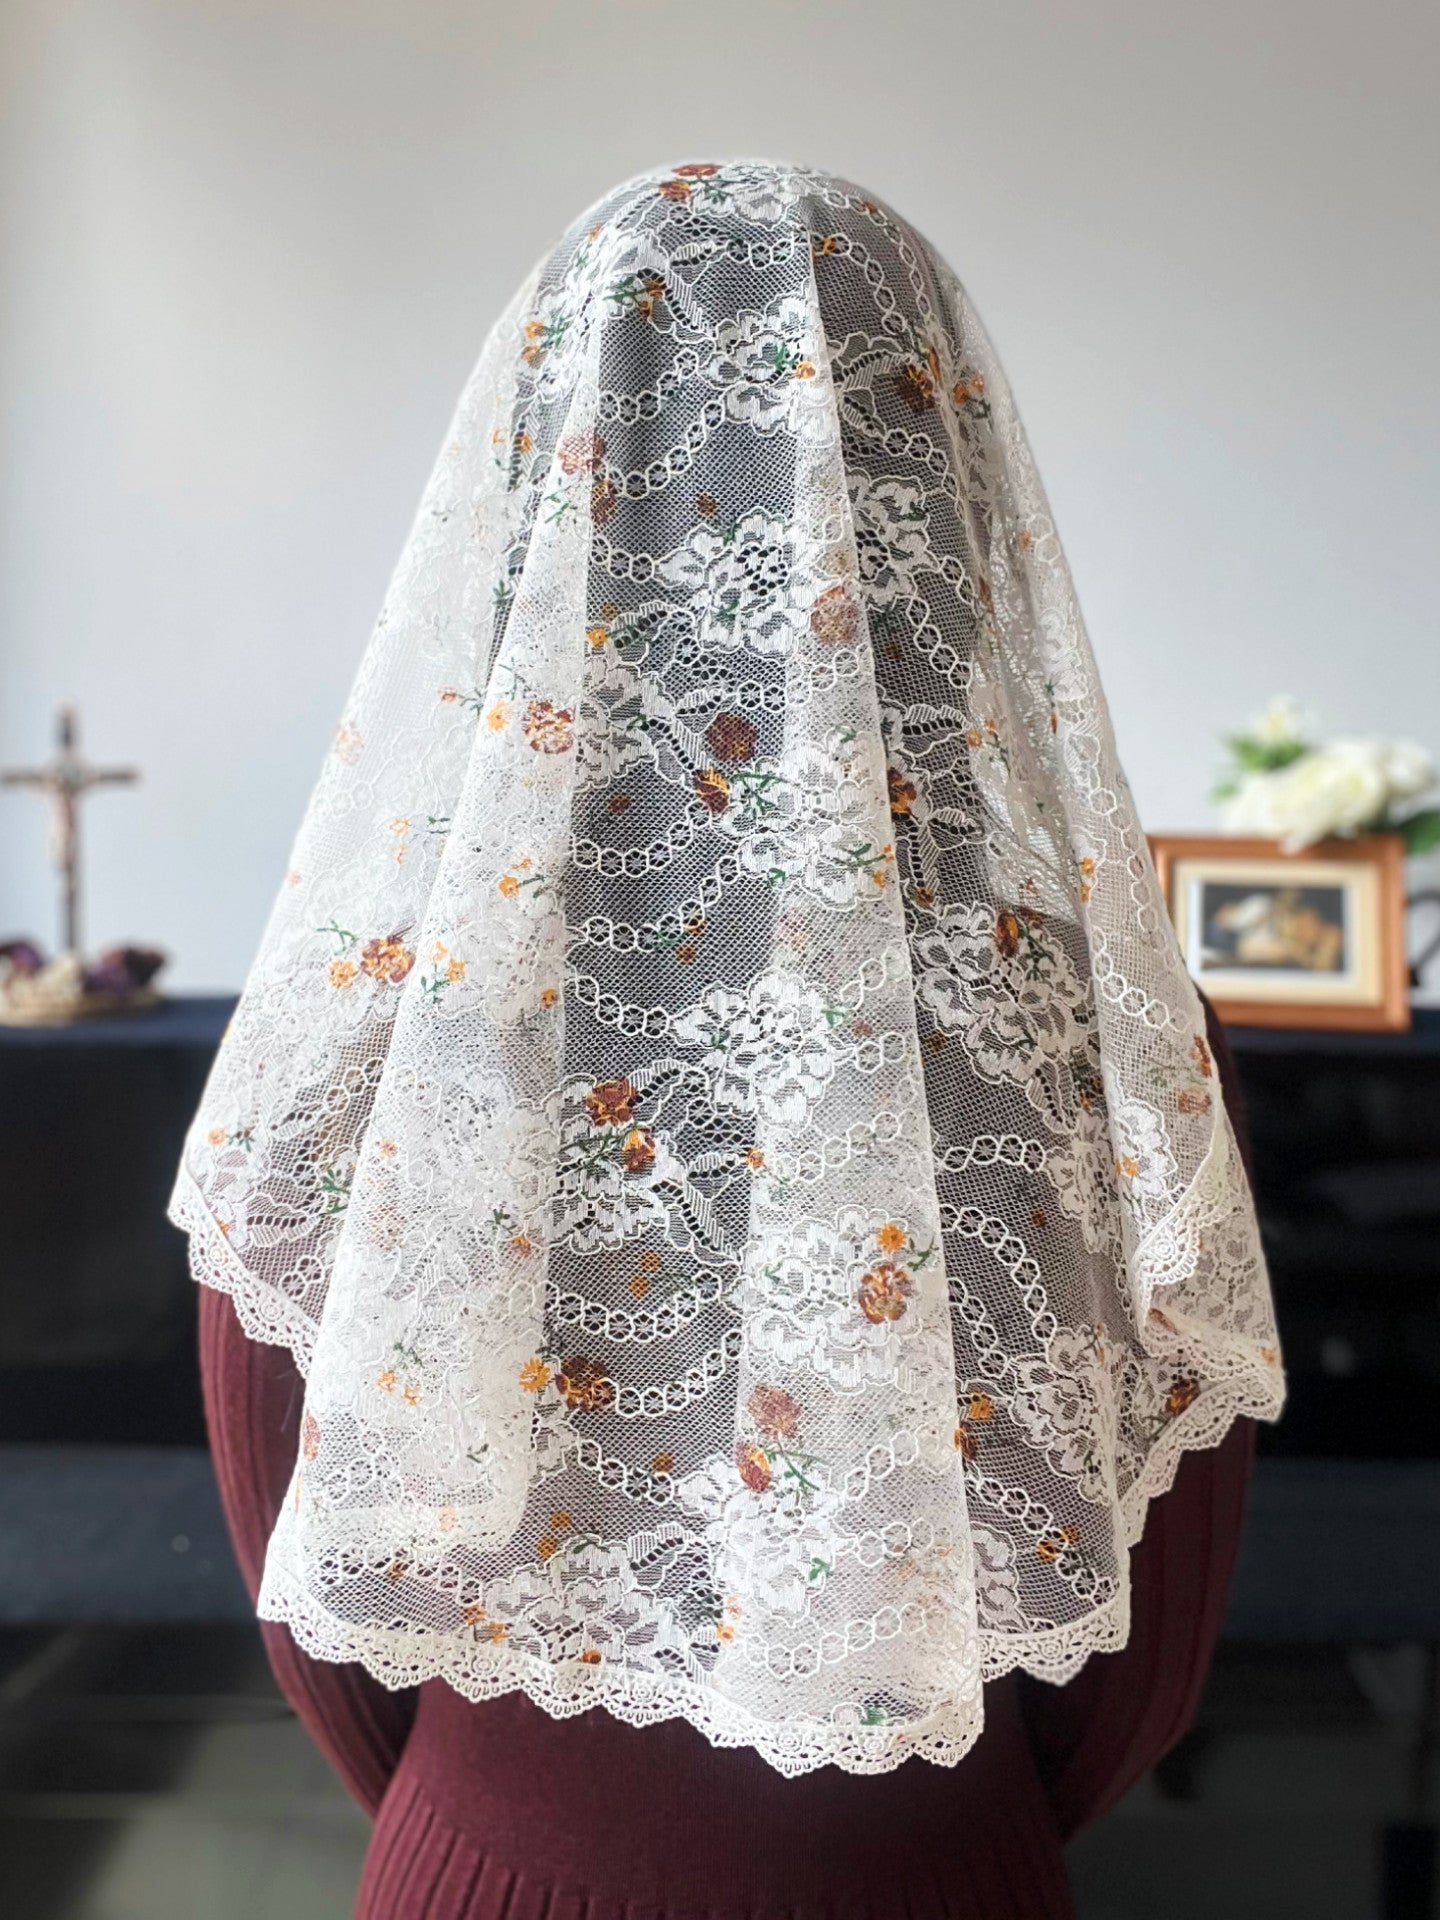 "The Strife is O'er" Floral Printed Lace Princess Veil (White / Floral)